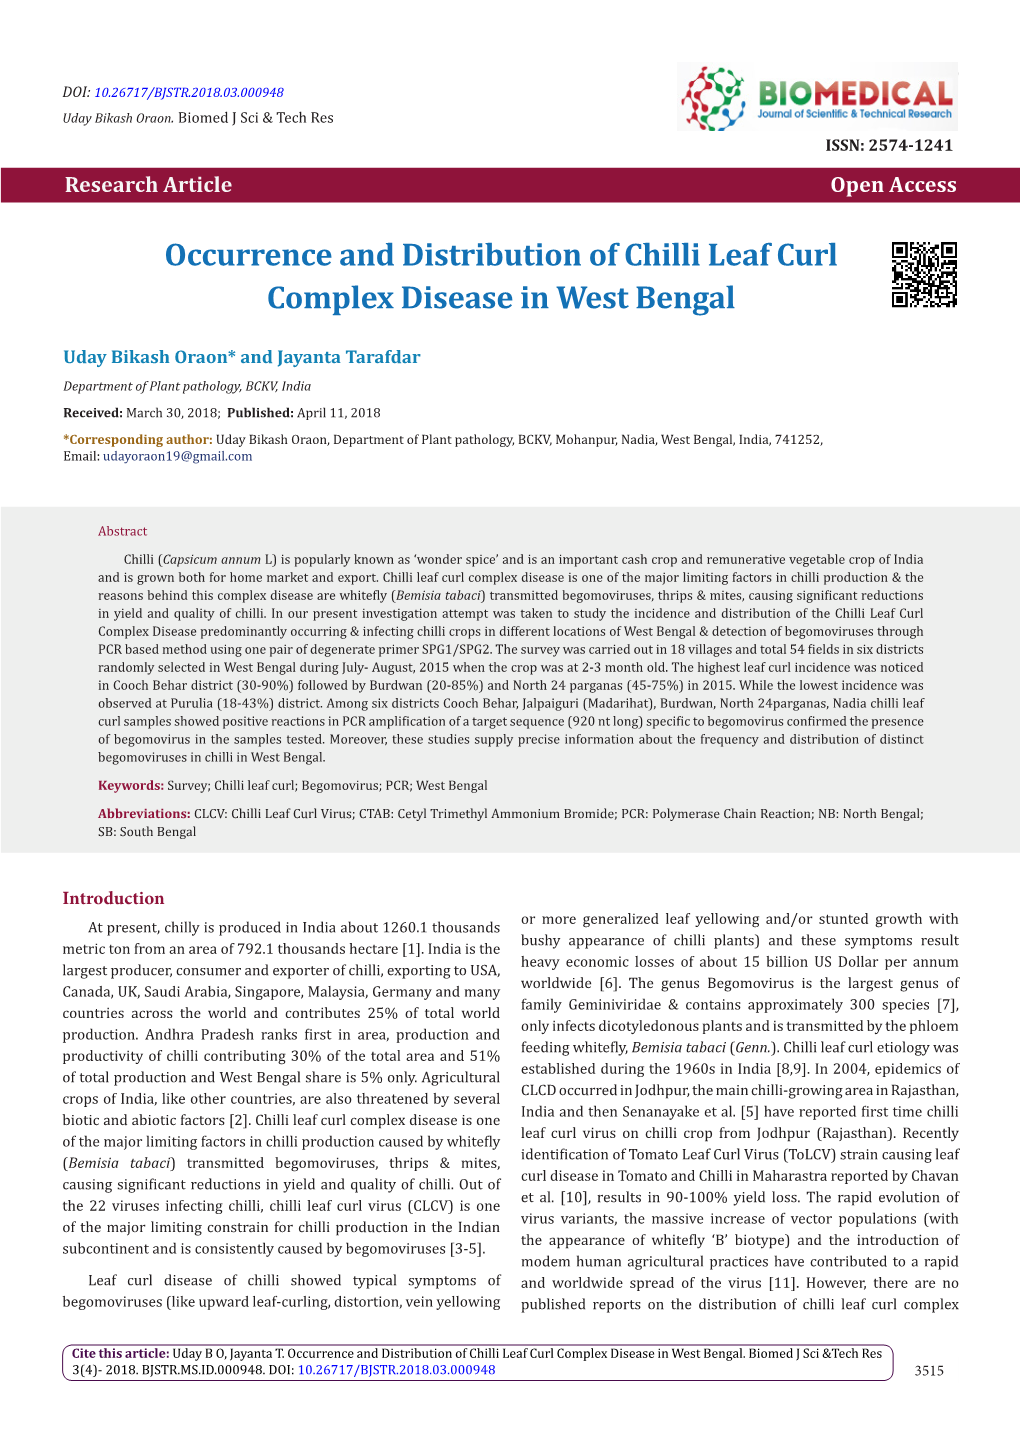 Occurrence and Distribution of Chilli Leaf Curl Complex Disease in West Bengal